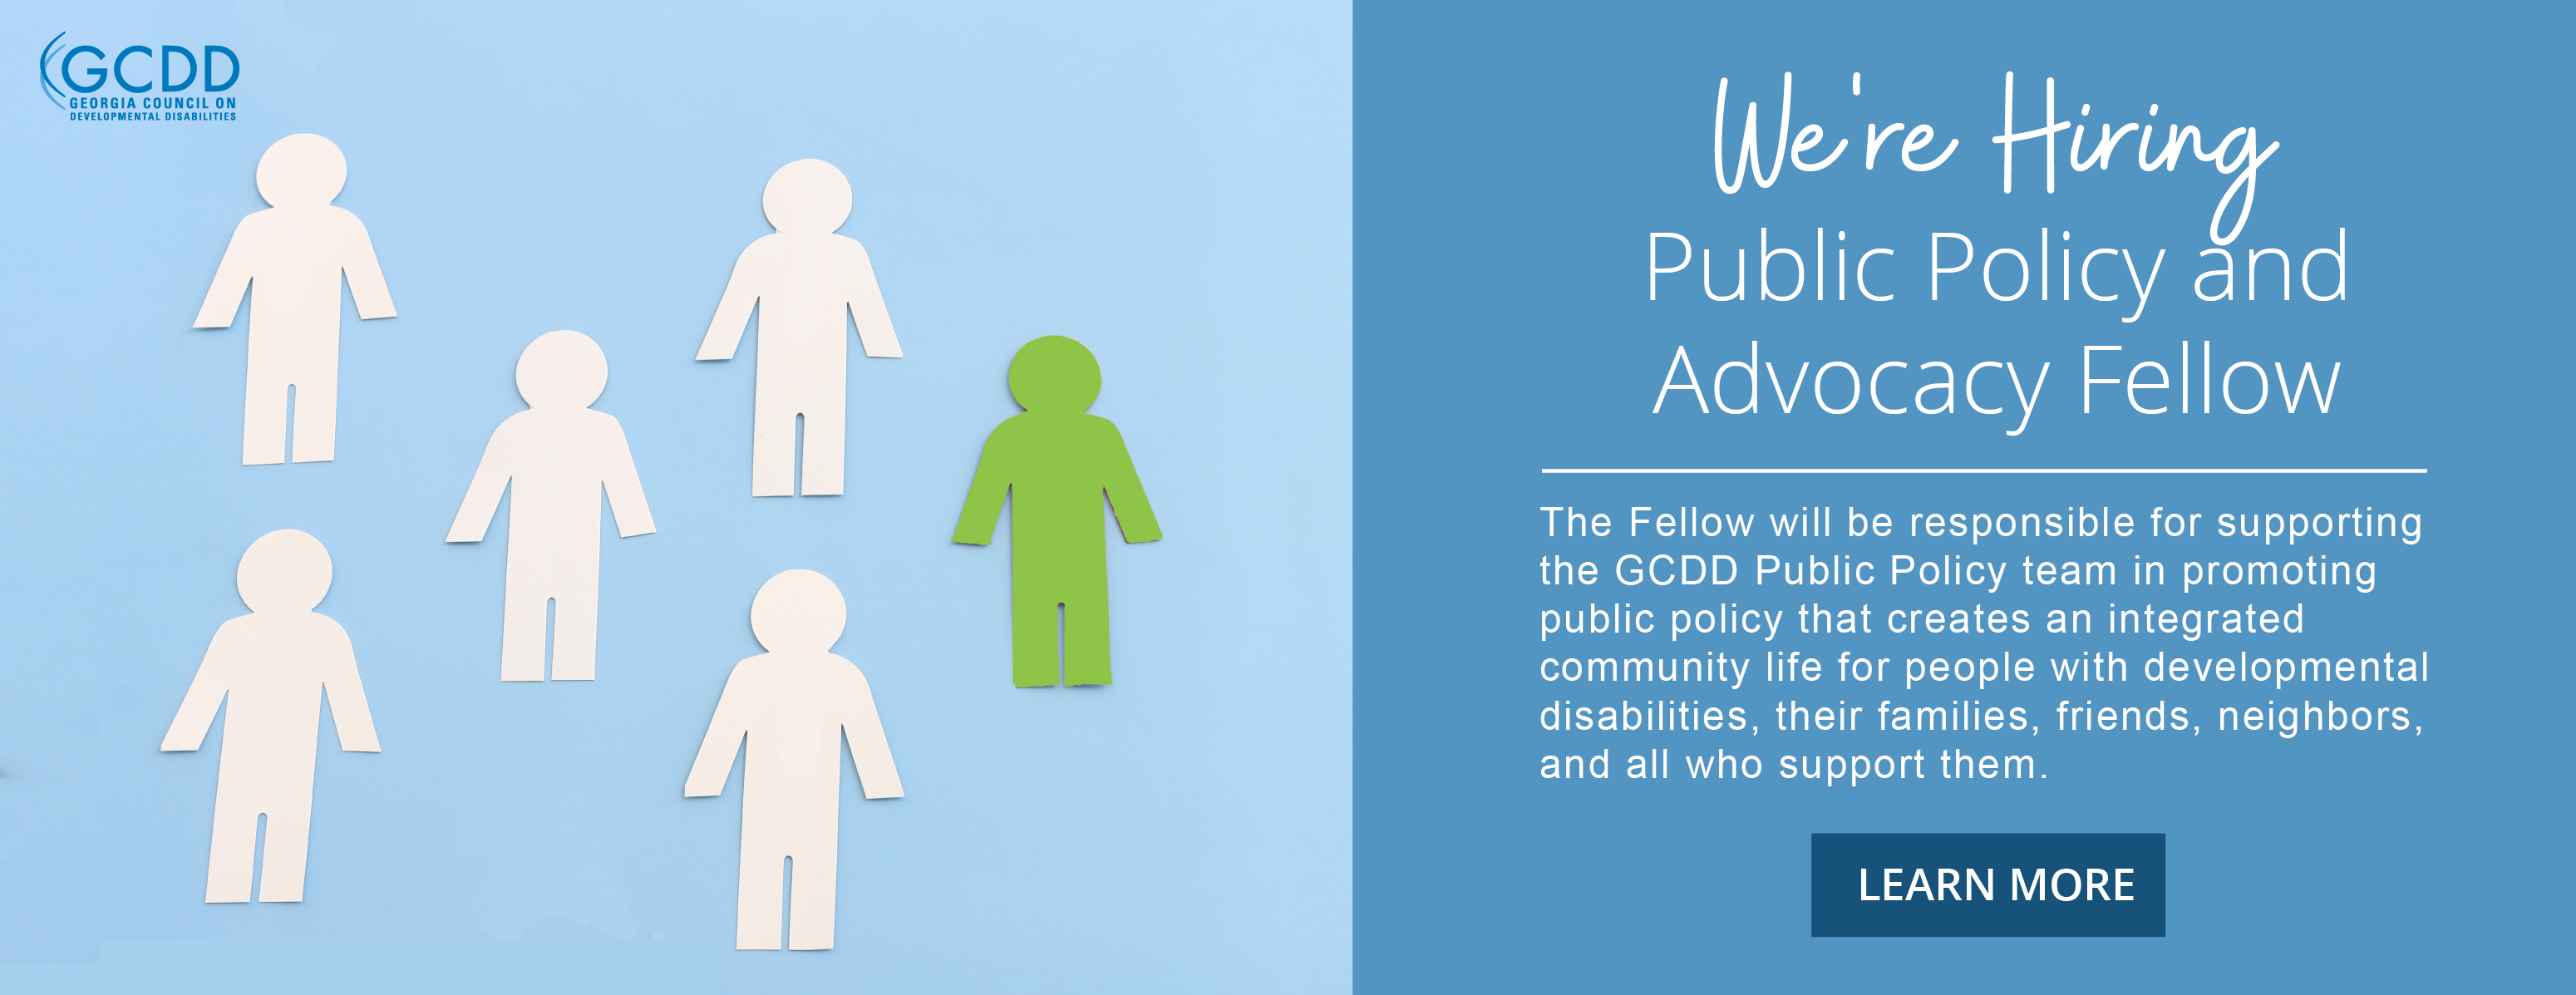 Public Policy and Advocacy Fellow Position